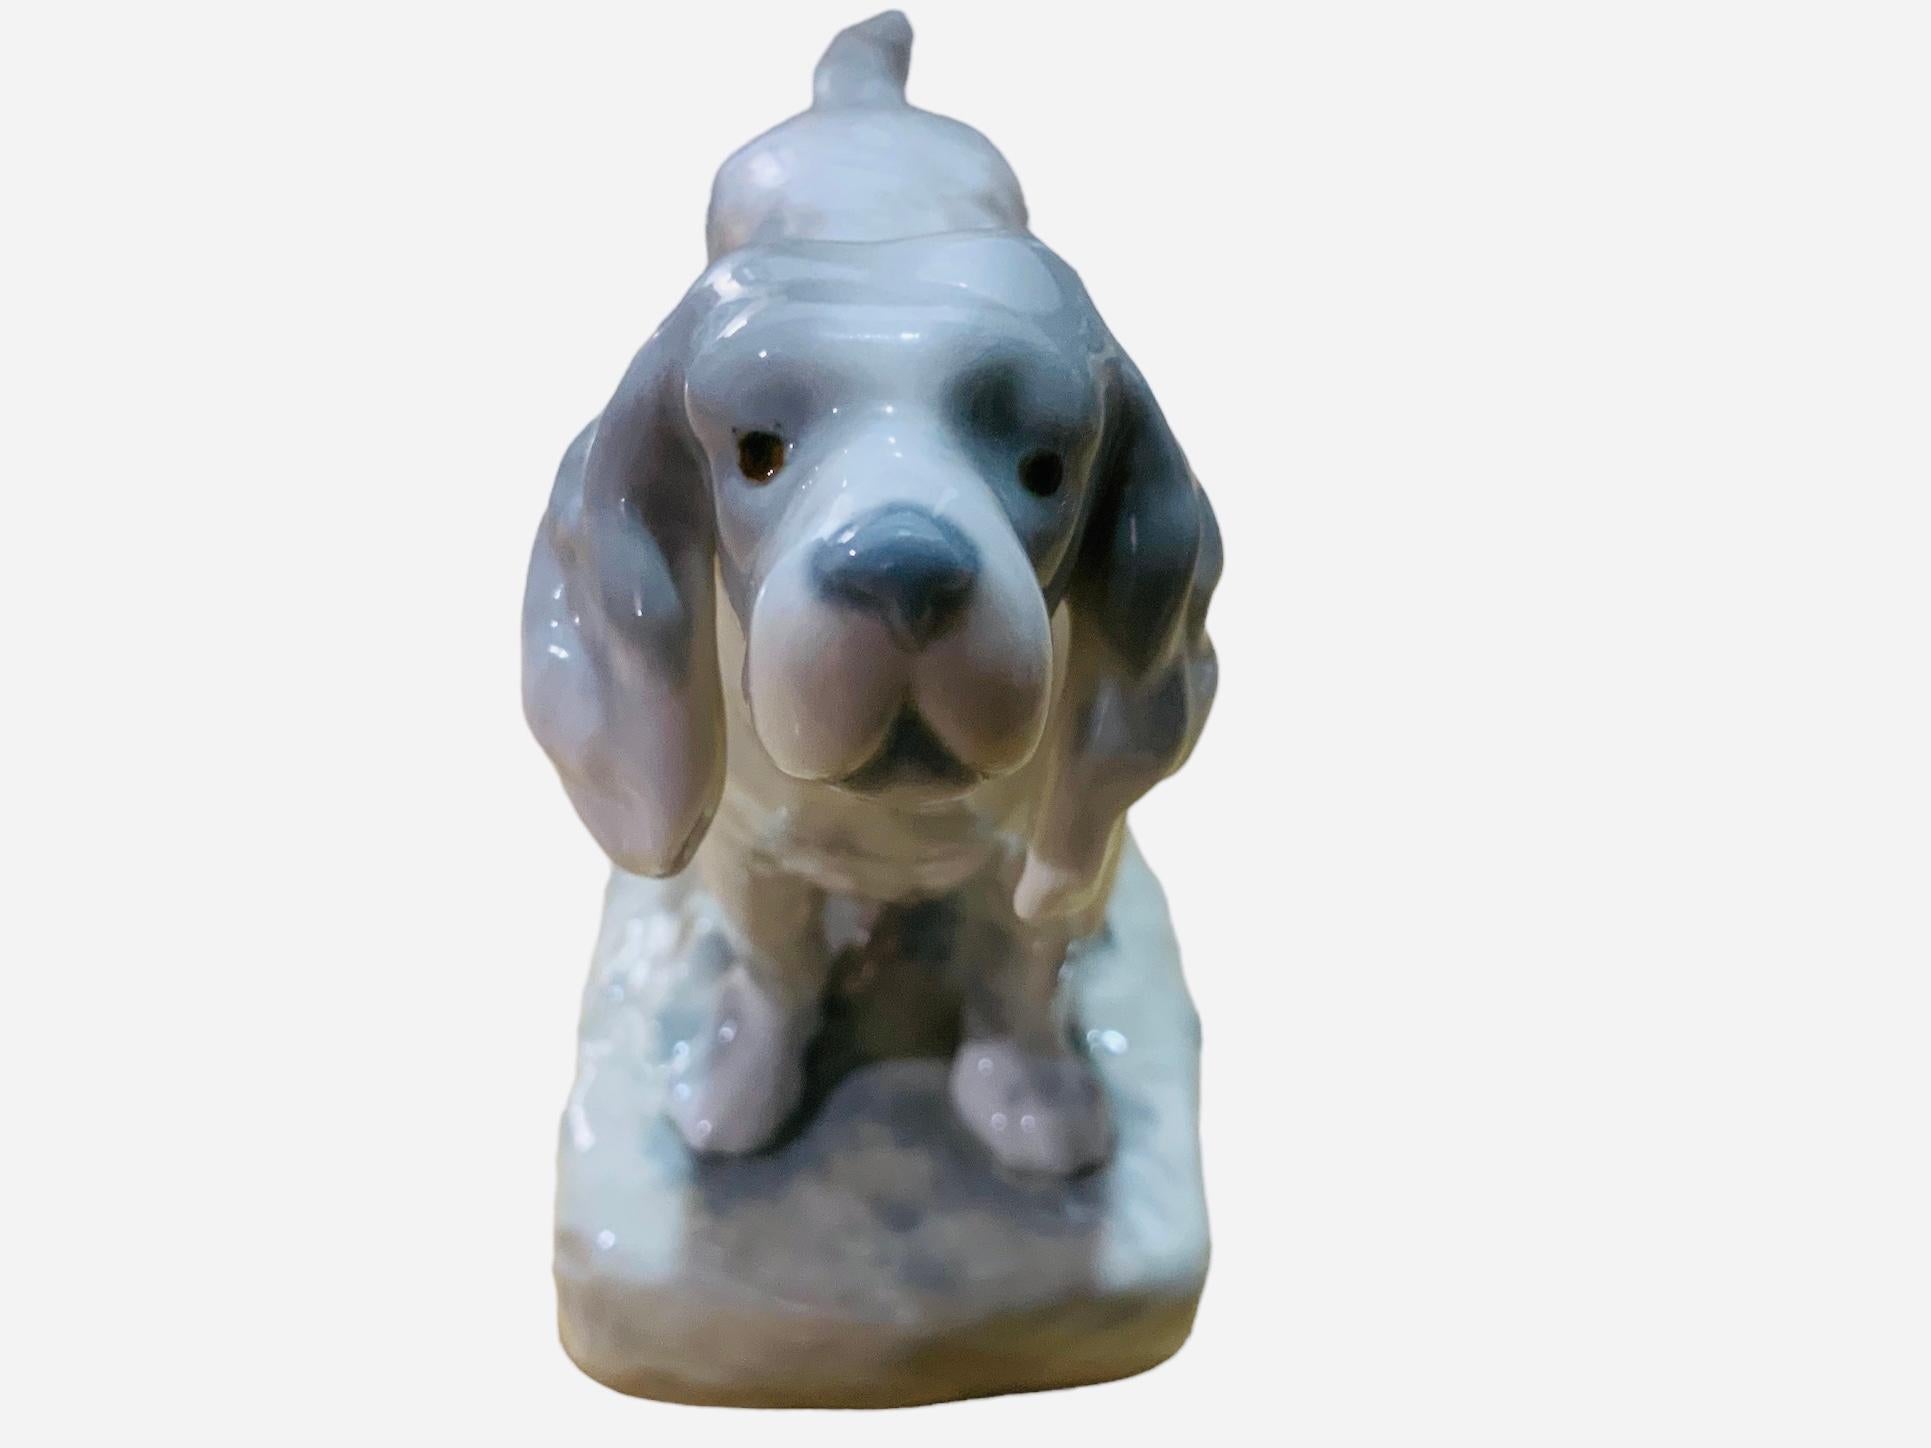 This is a Rex Valencia porcelain figurine of a dog. It depicts a hand painted grey and white color astute English Setter dog standing up over a base adorned with a cut trunk and soil. He has a beige belt in his neck, a straight tail and is ready to